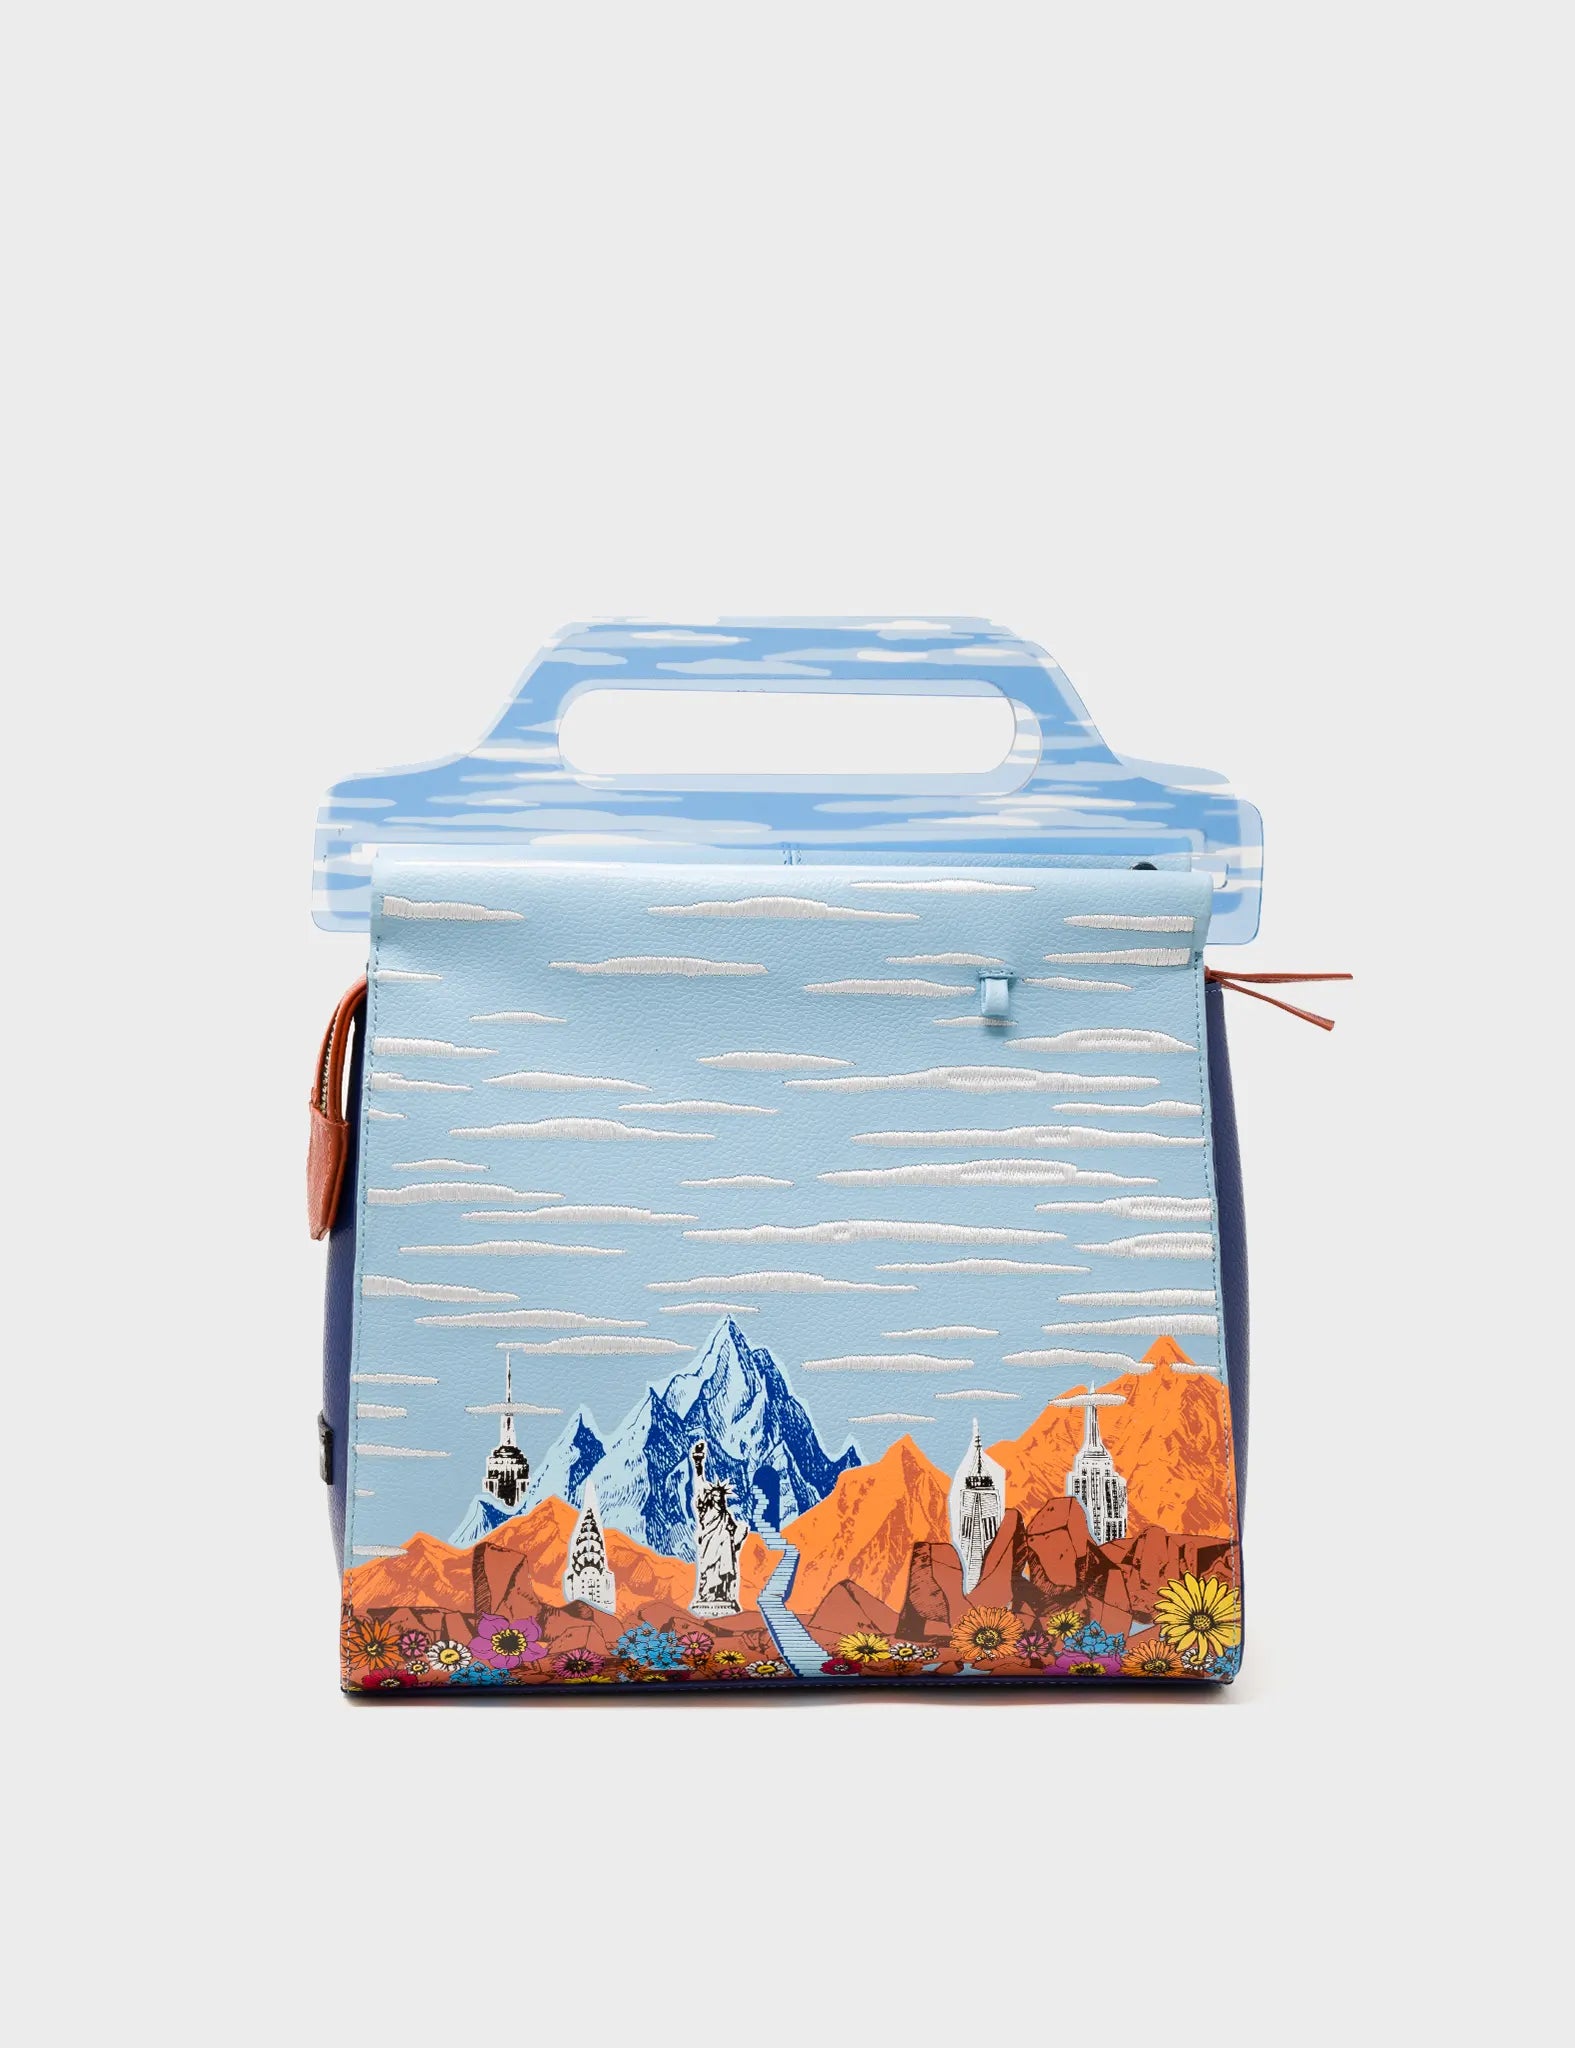 Blue Crossbody Handbag - Mountains, Flowers and Clouds Design - Front